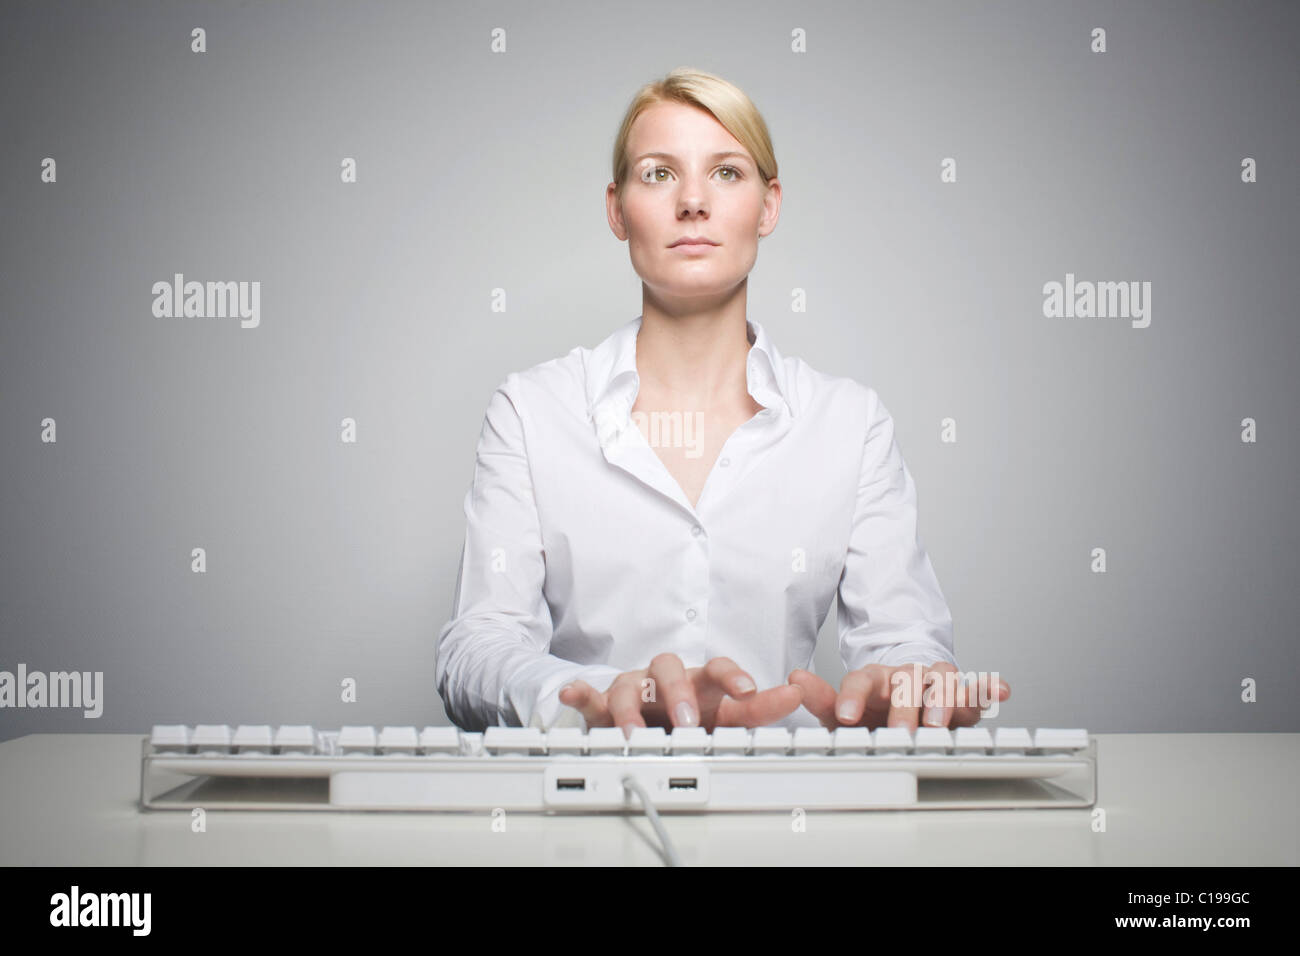 Young blond woman typing on a computer keyboard Stock Photo